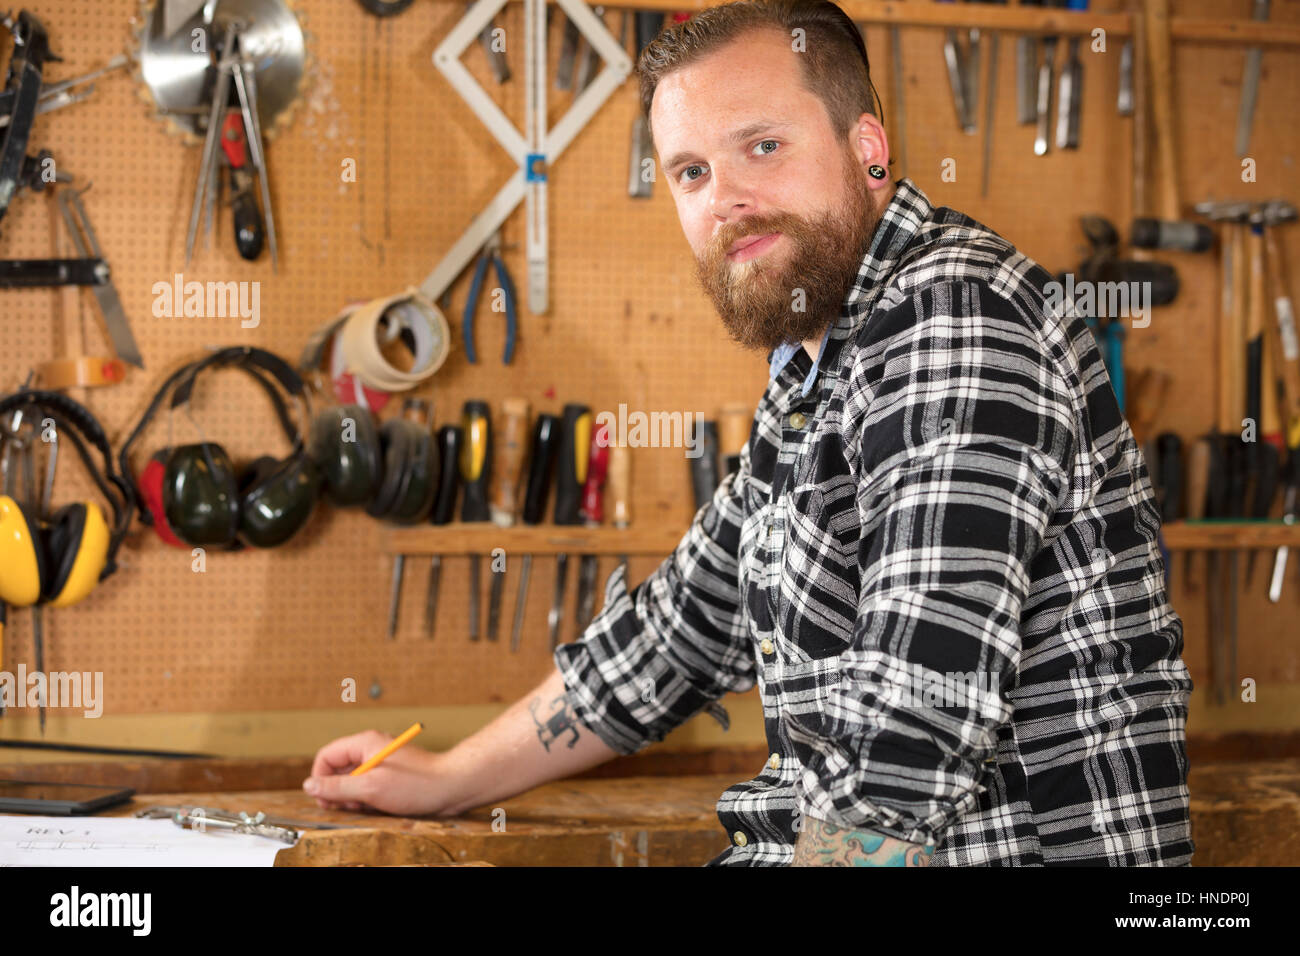 Environmental portrait of a carpenter in workshop Stock Photo